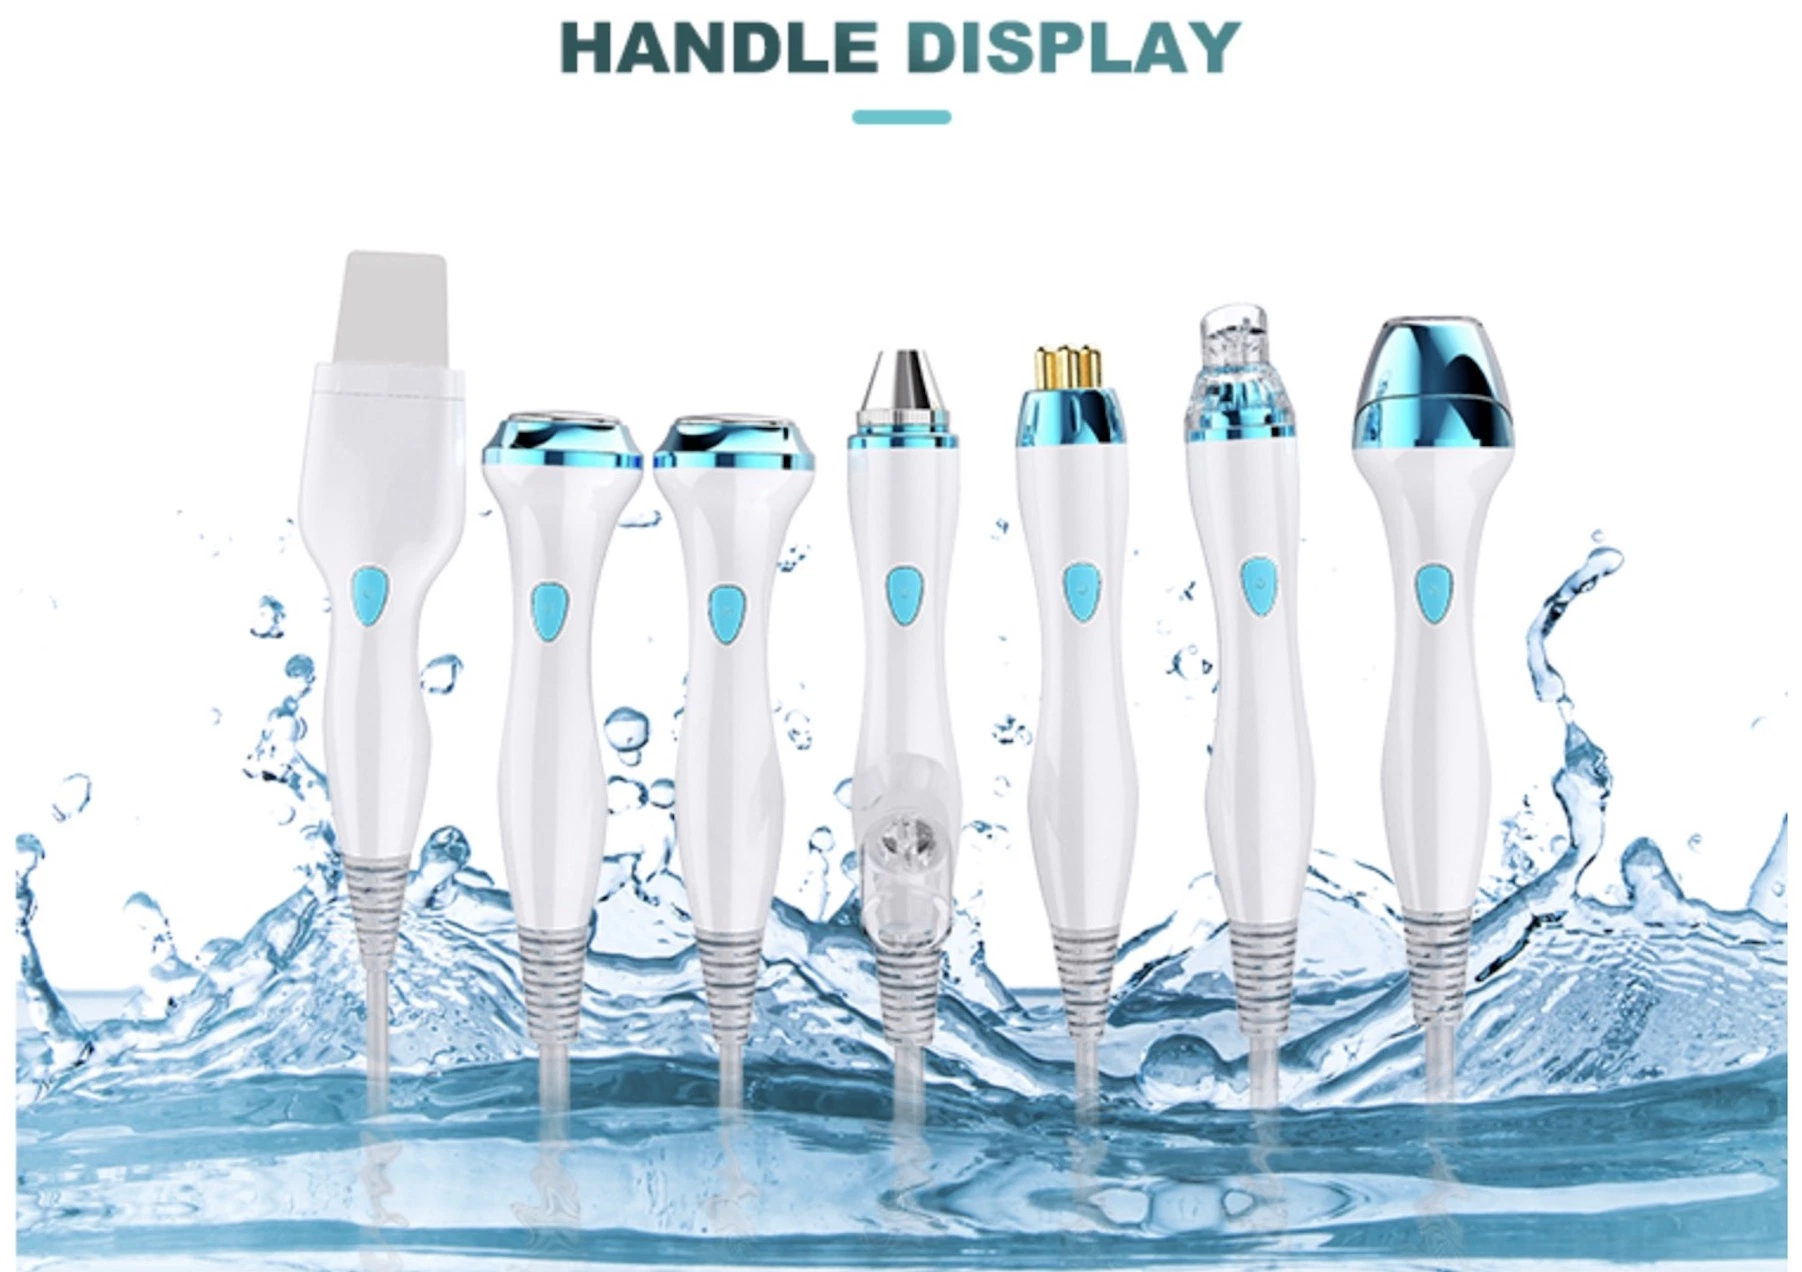 7 in 1 Super Suction Ice Blue Intelligent Skin Analyzer Management Hrdro Facial SPA Facial Dermabrasion Beauty Salon Equipment